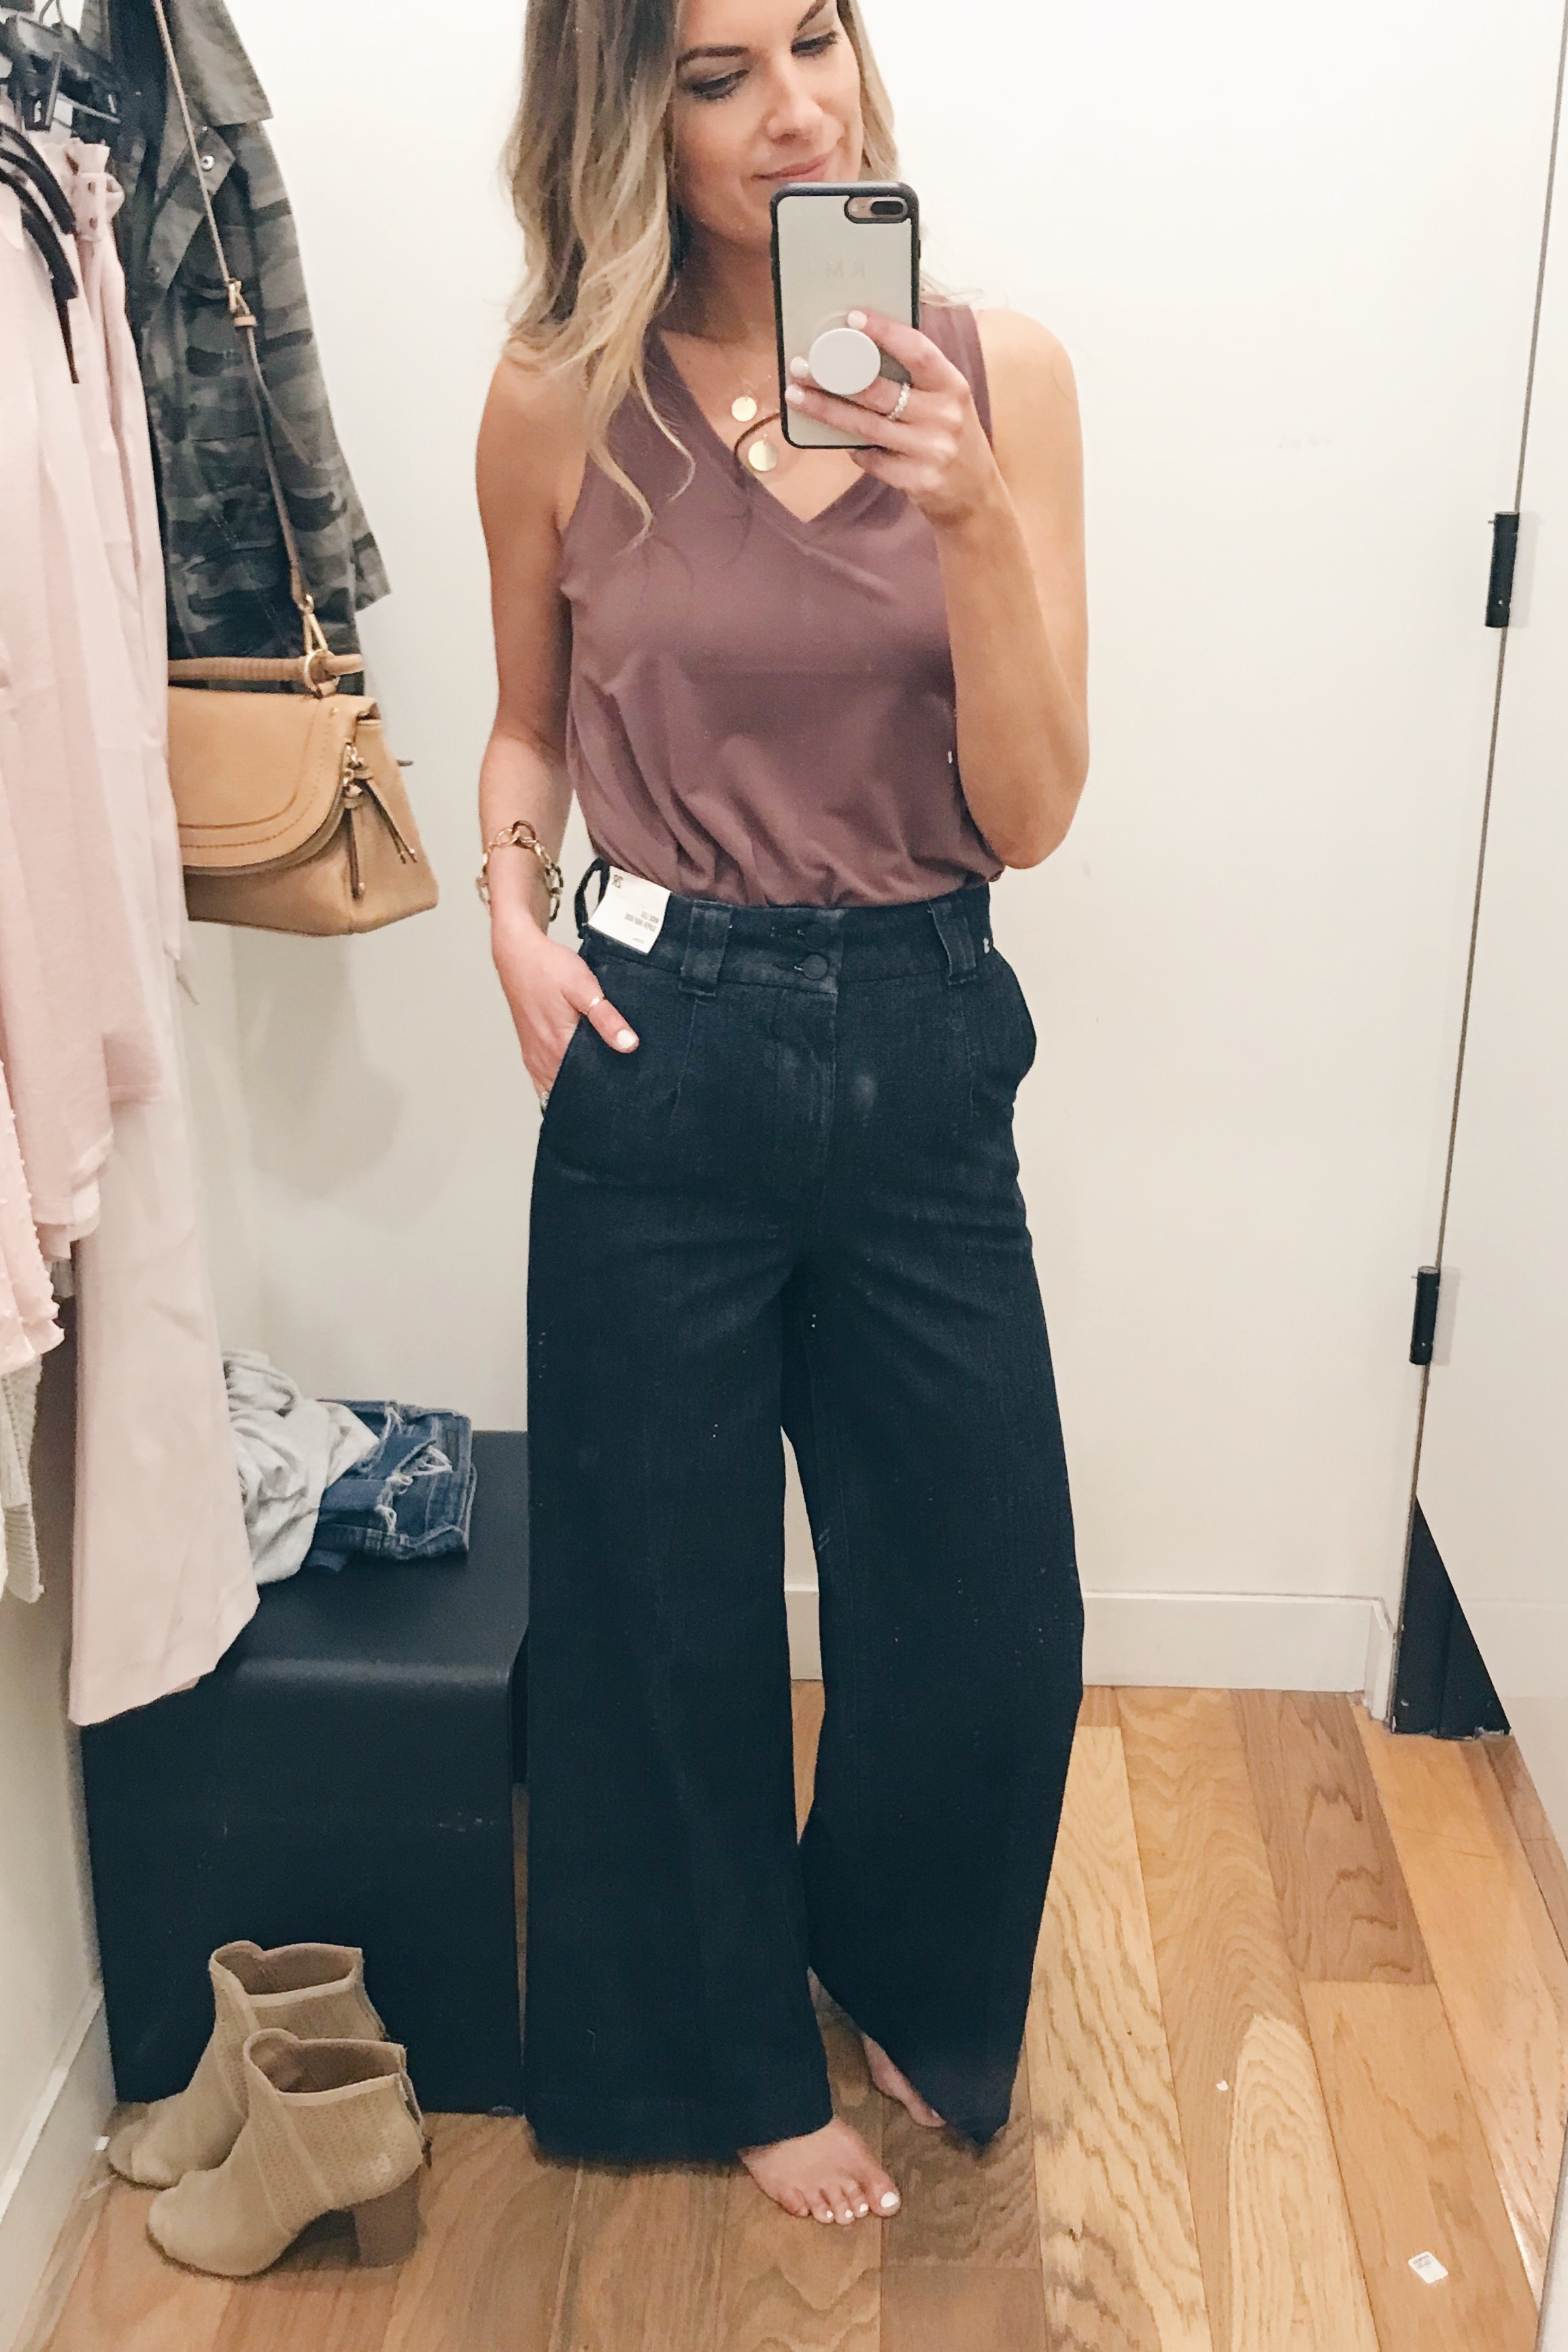 express march 2019 try-on - wide leg jeans and mauve tank on Pinteresting Plans fashion blog